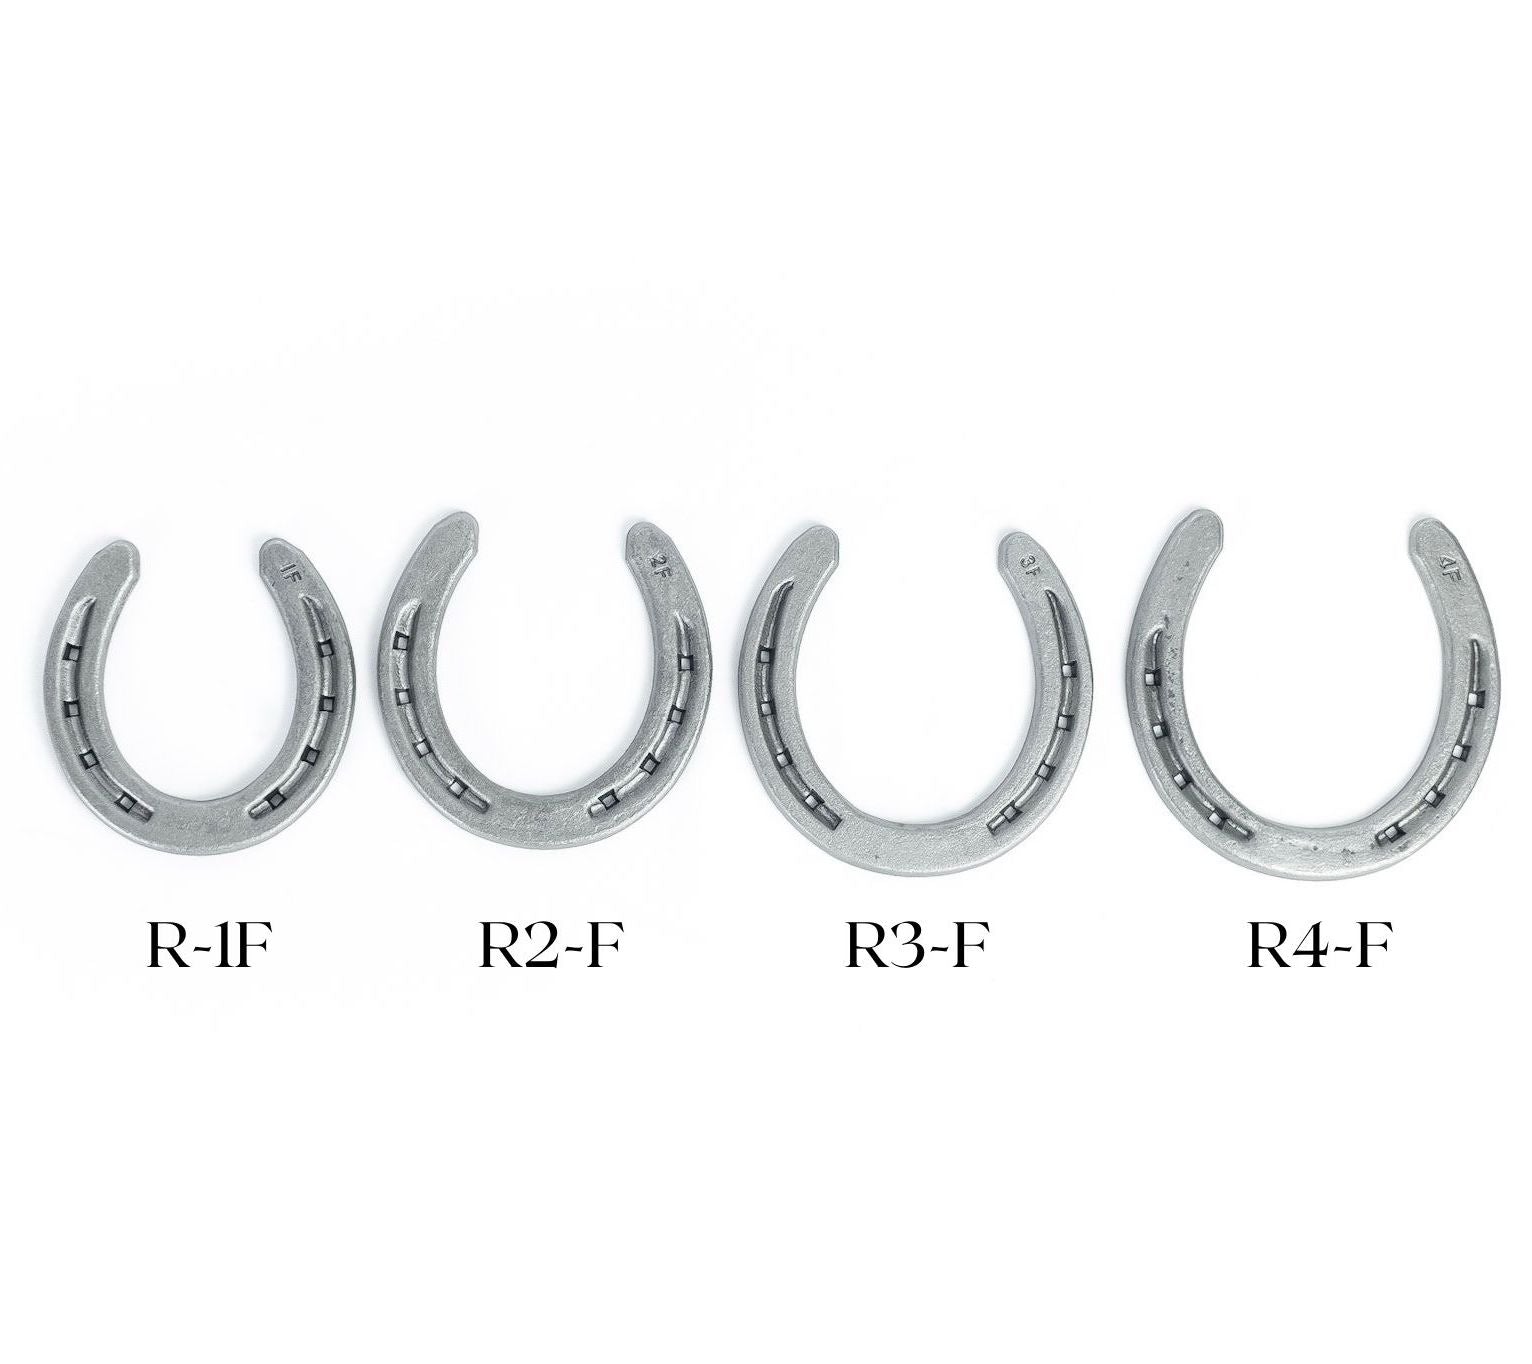 New Steel Horseshoes - RDM Size 00 - R2-F -Sand Blasted Steel - The Heritage Forge